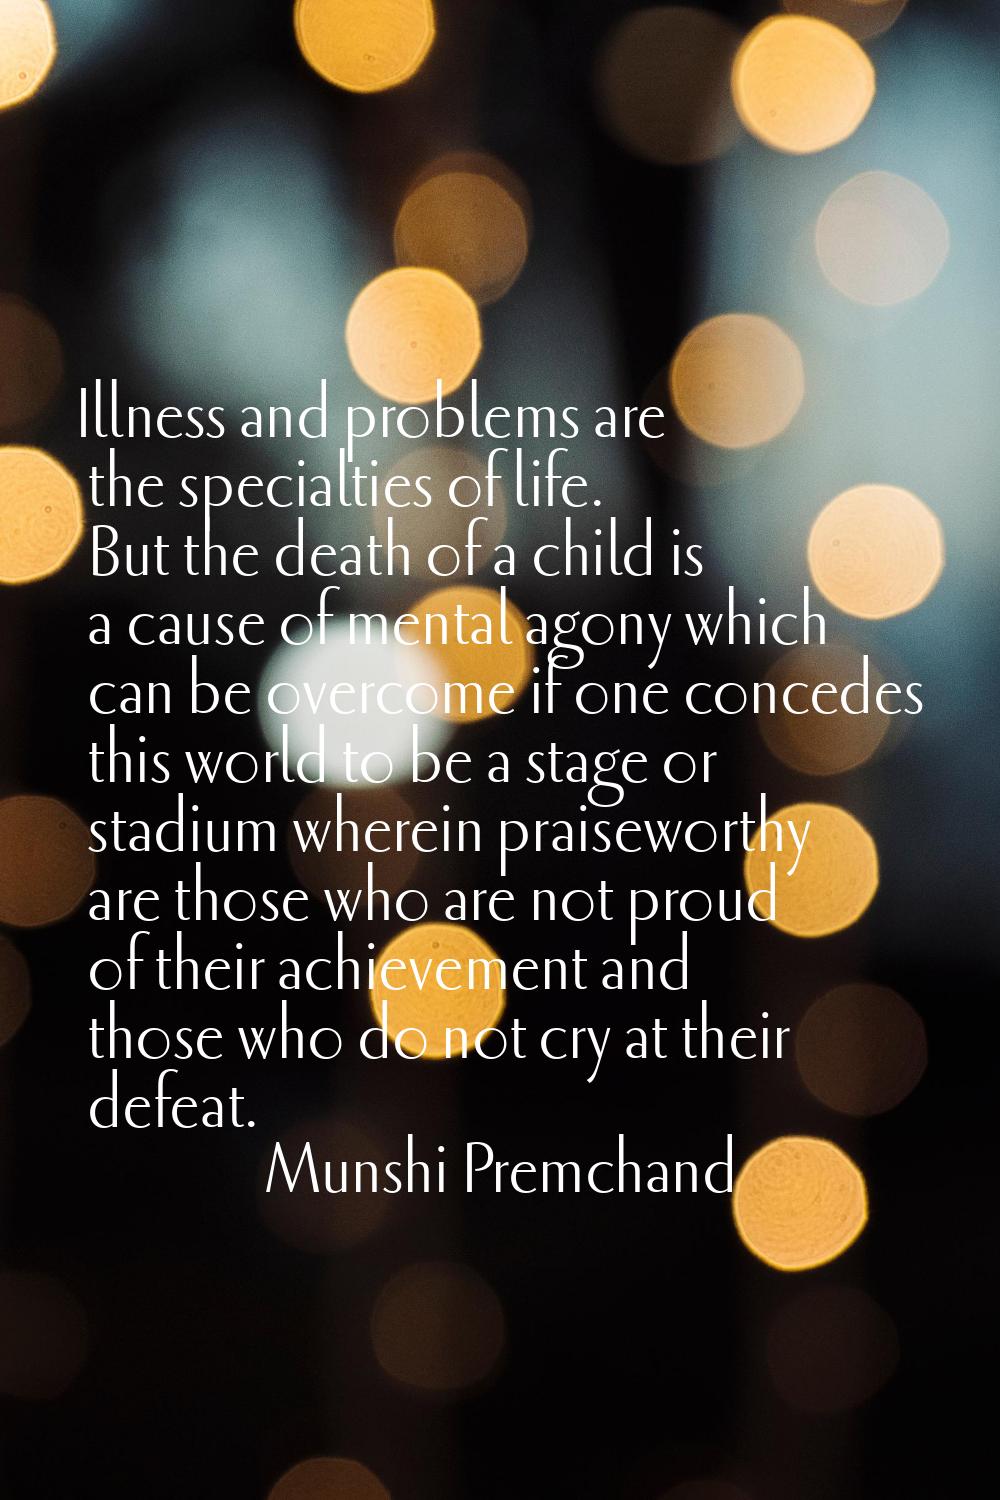 Illness and problems are the specialties of life. But the death of a child is a cause of mental ago